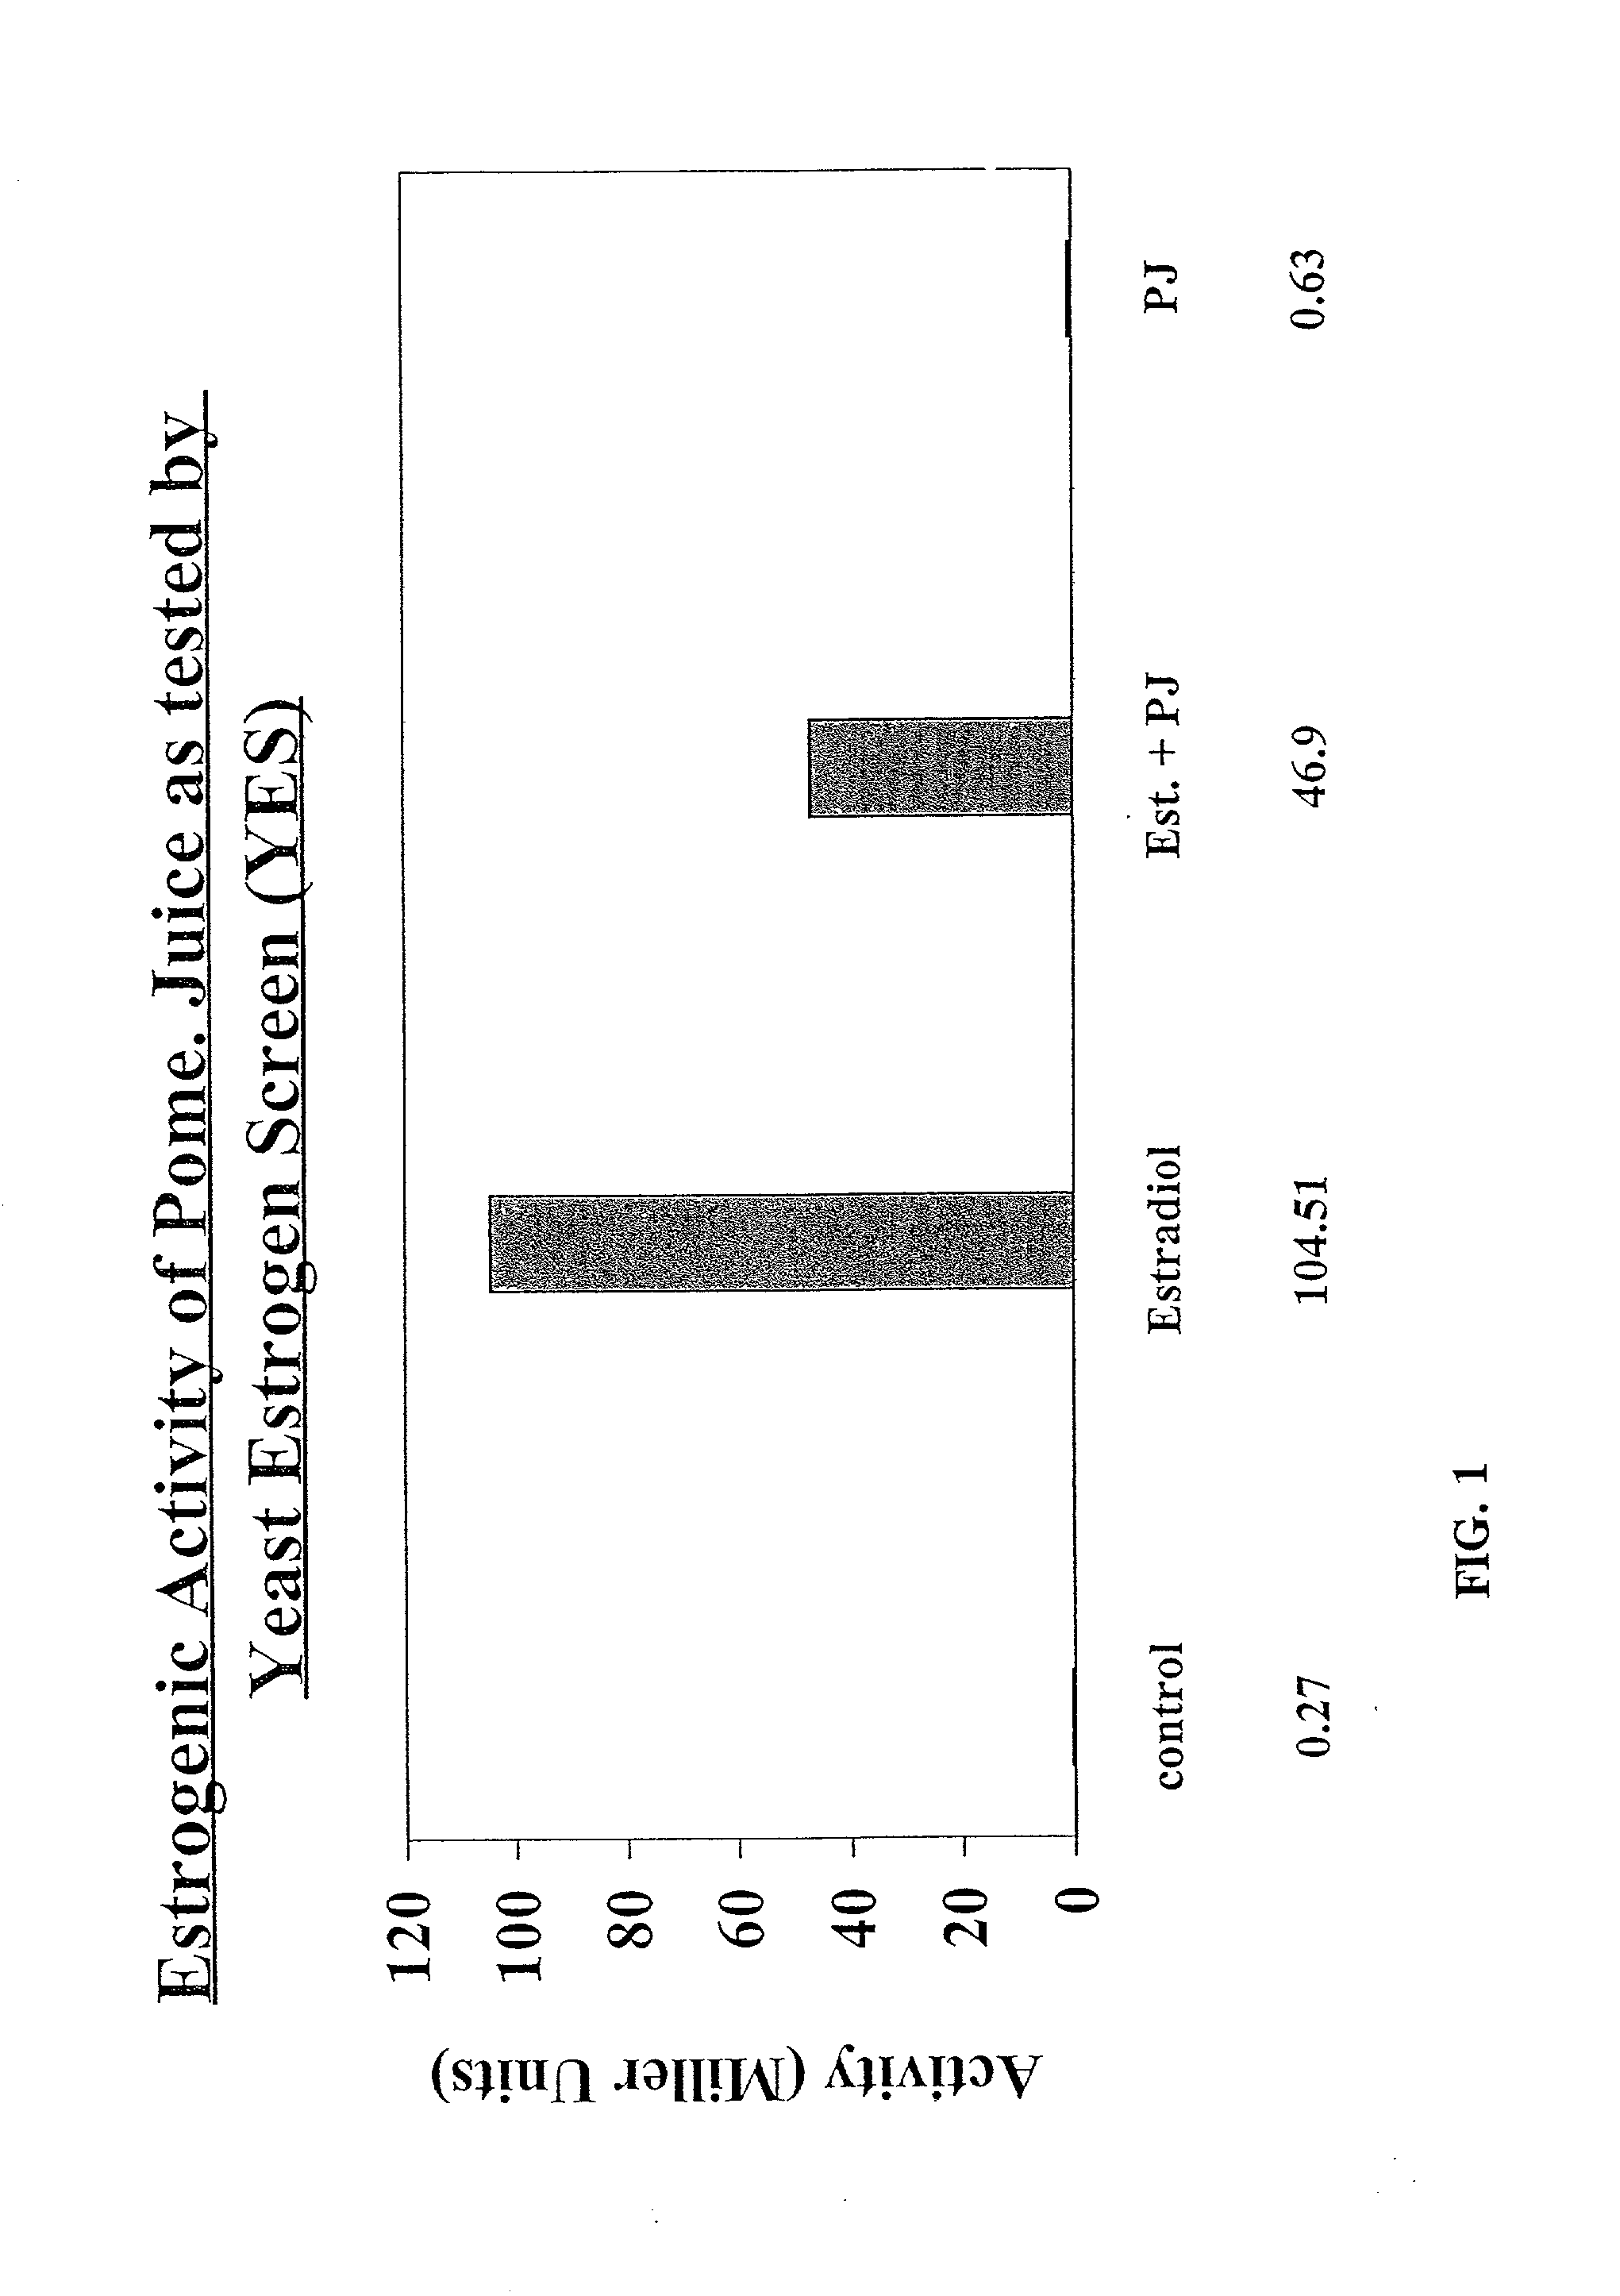 Pomegranate products useful in improving health and methods of use thereof